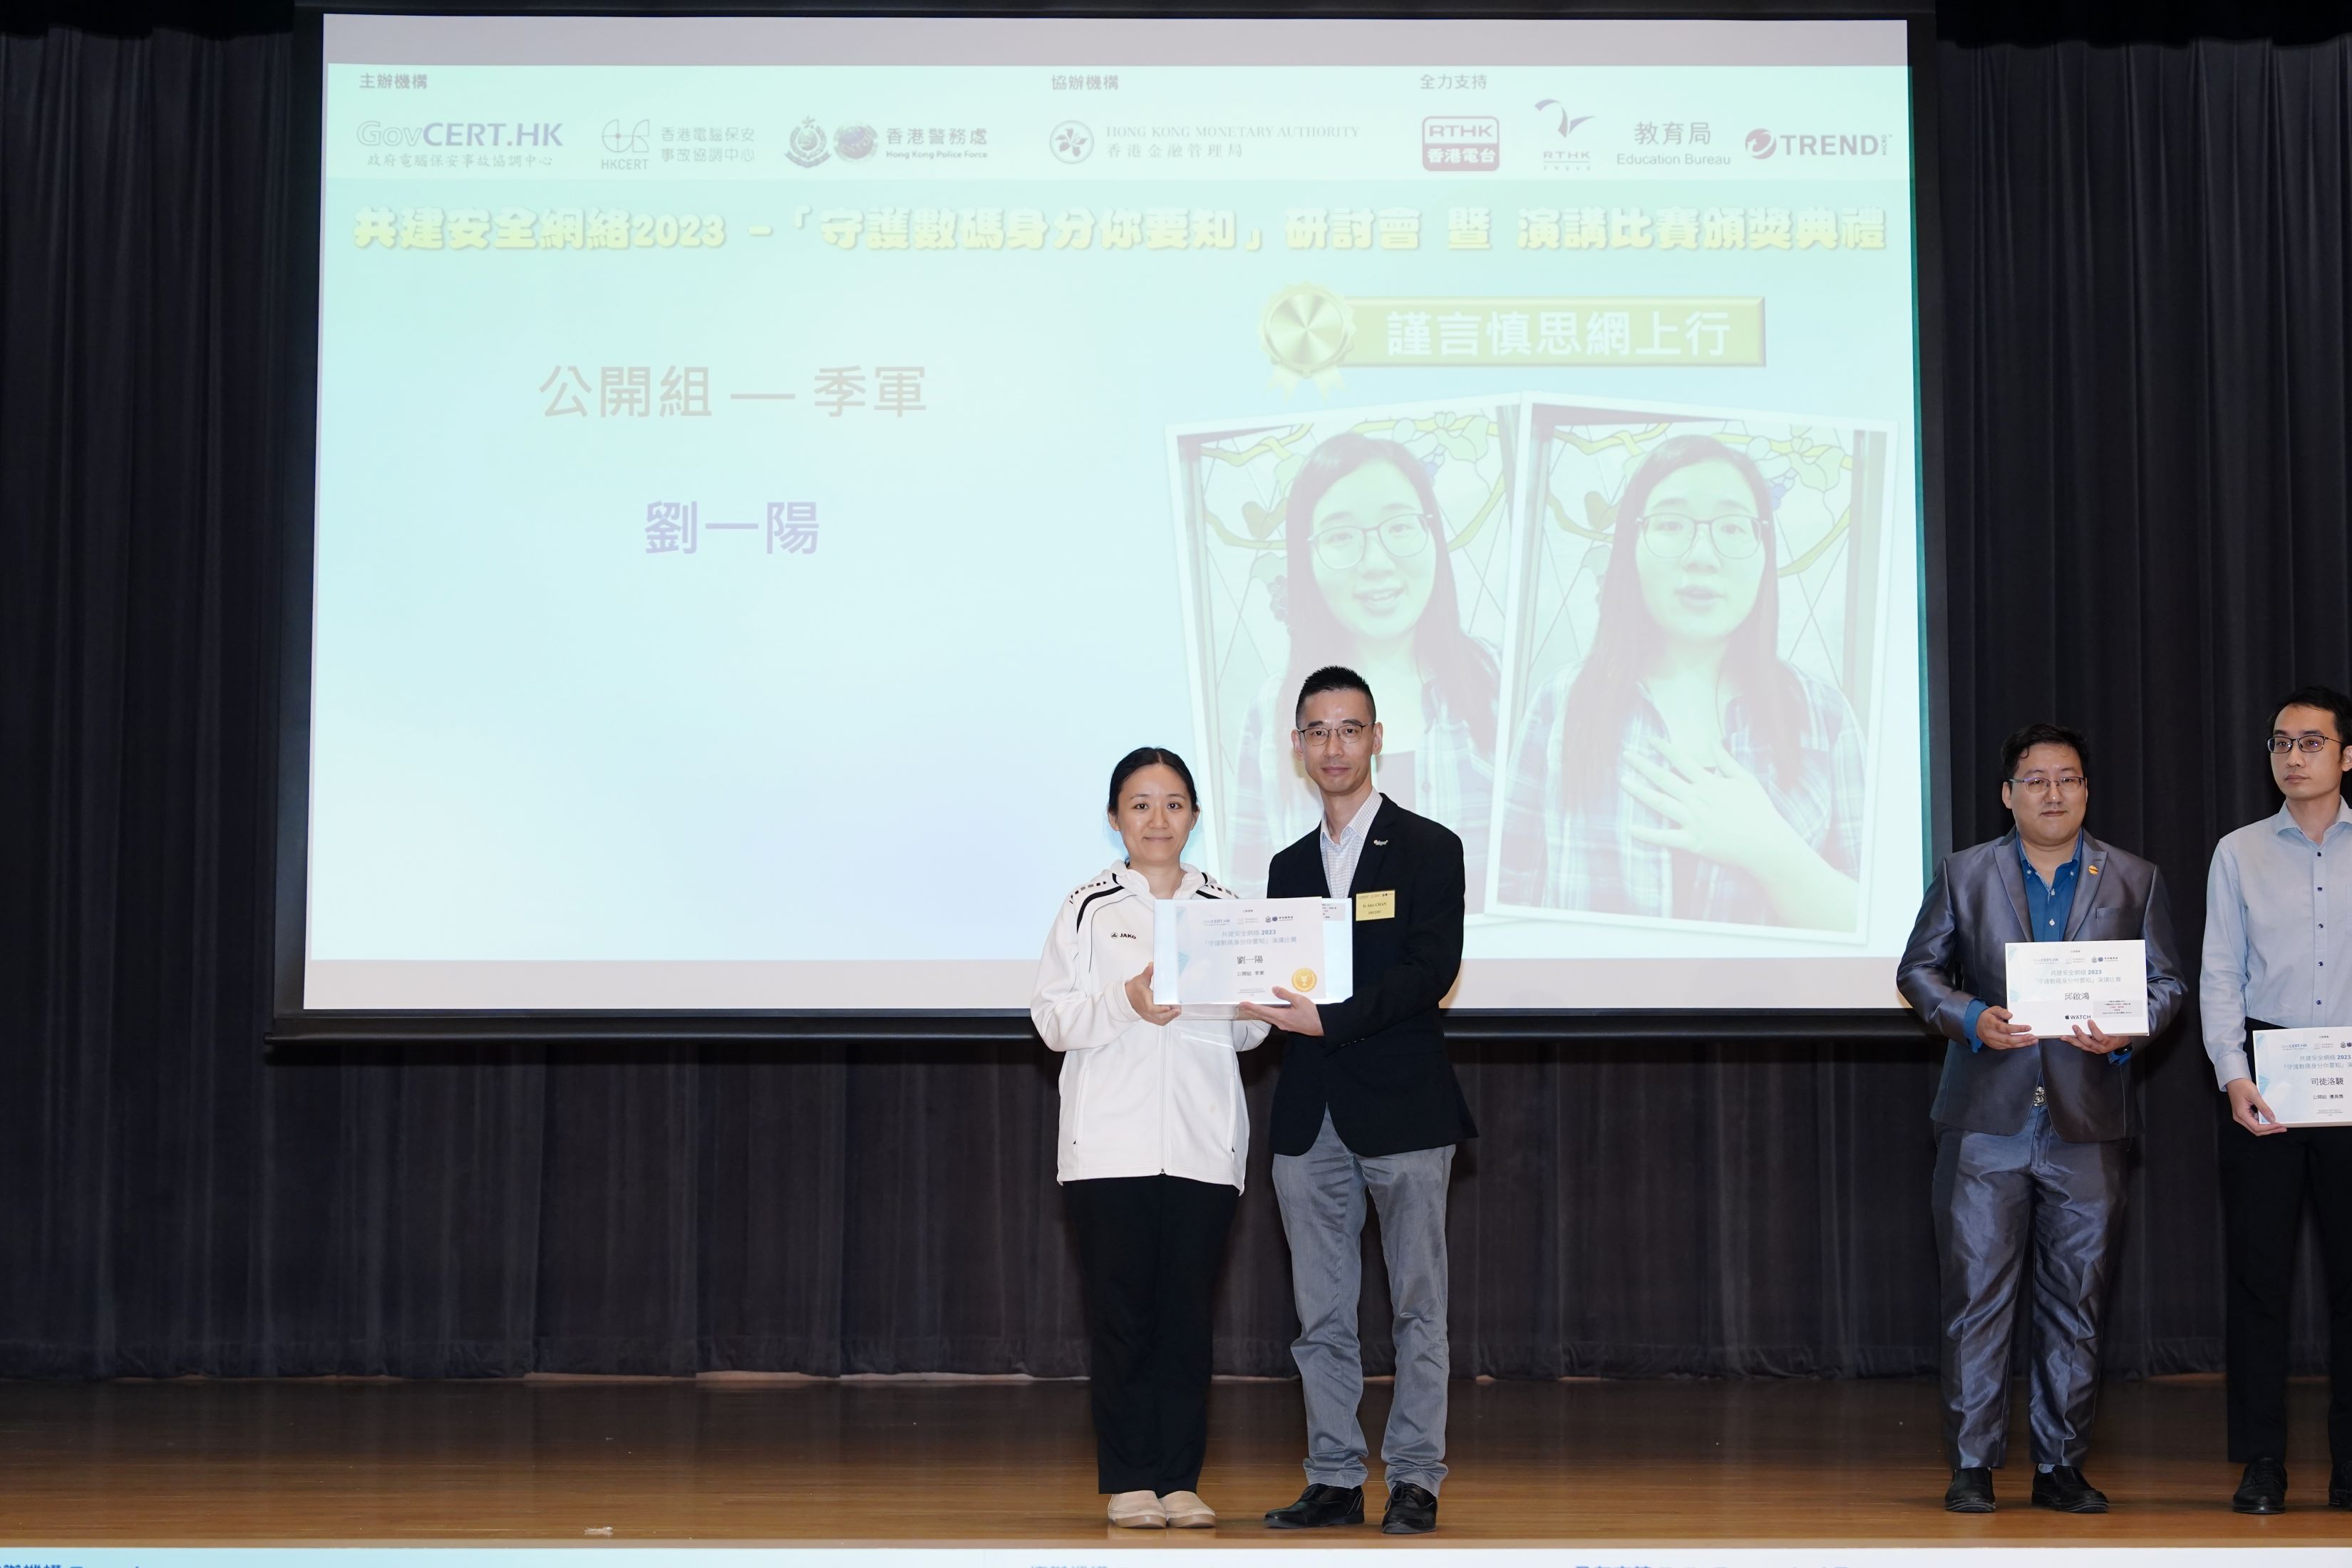 2nd Runner-up of Open Category - Lau Yat Yeung (award received by authorised representative)